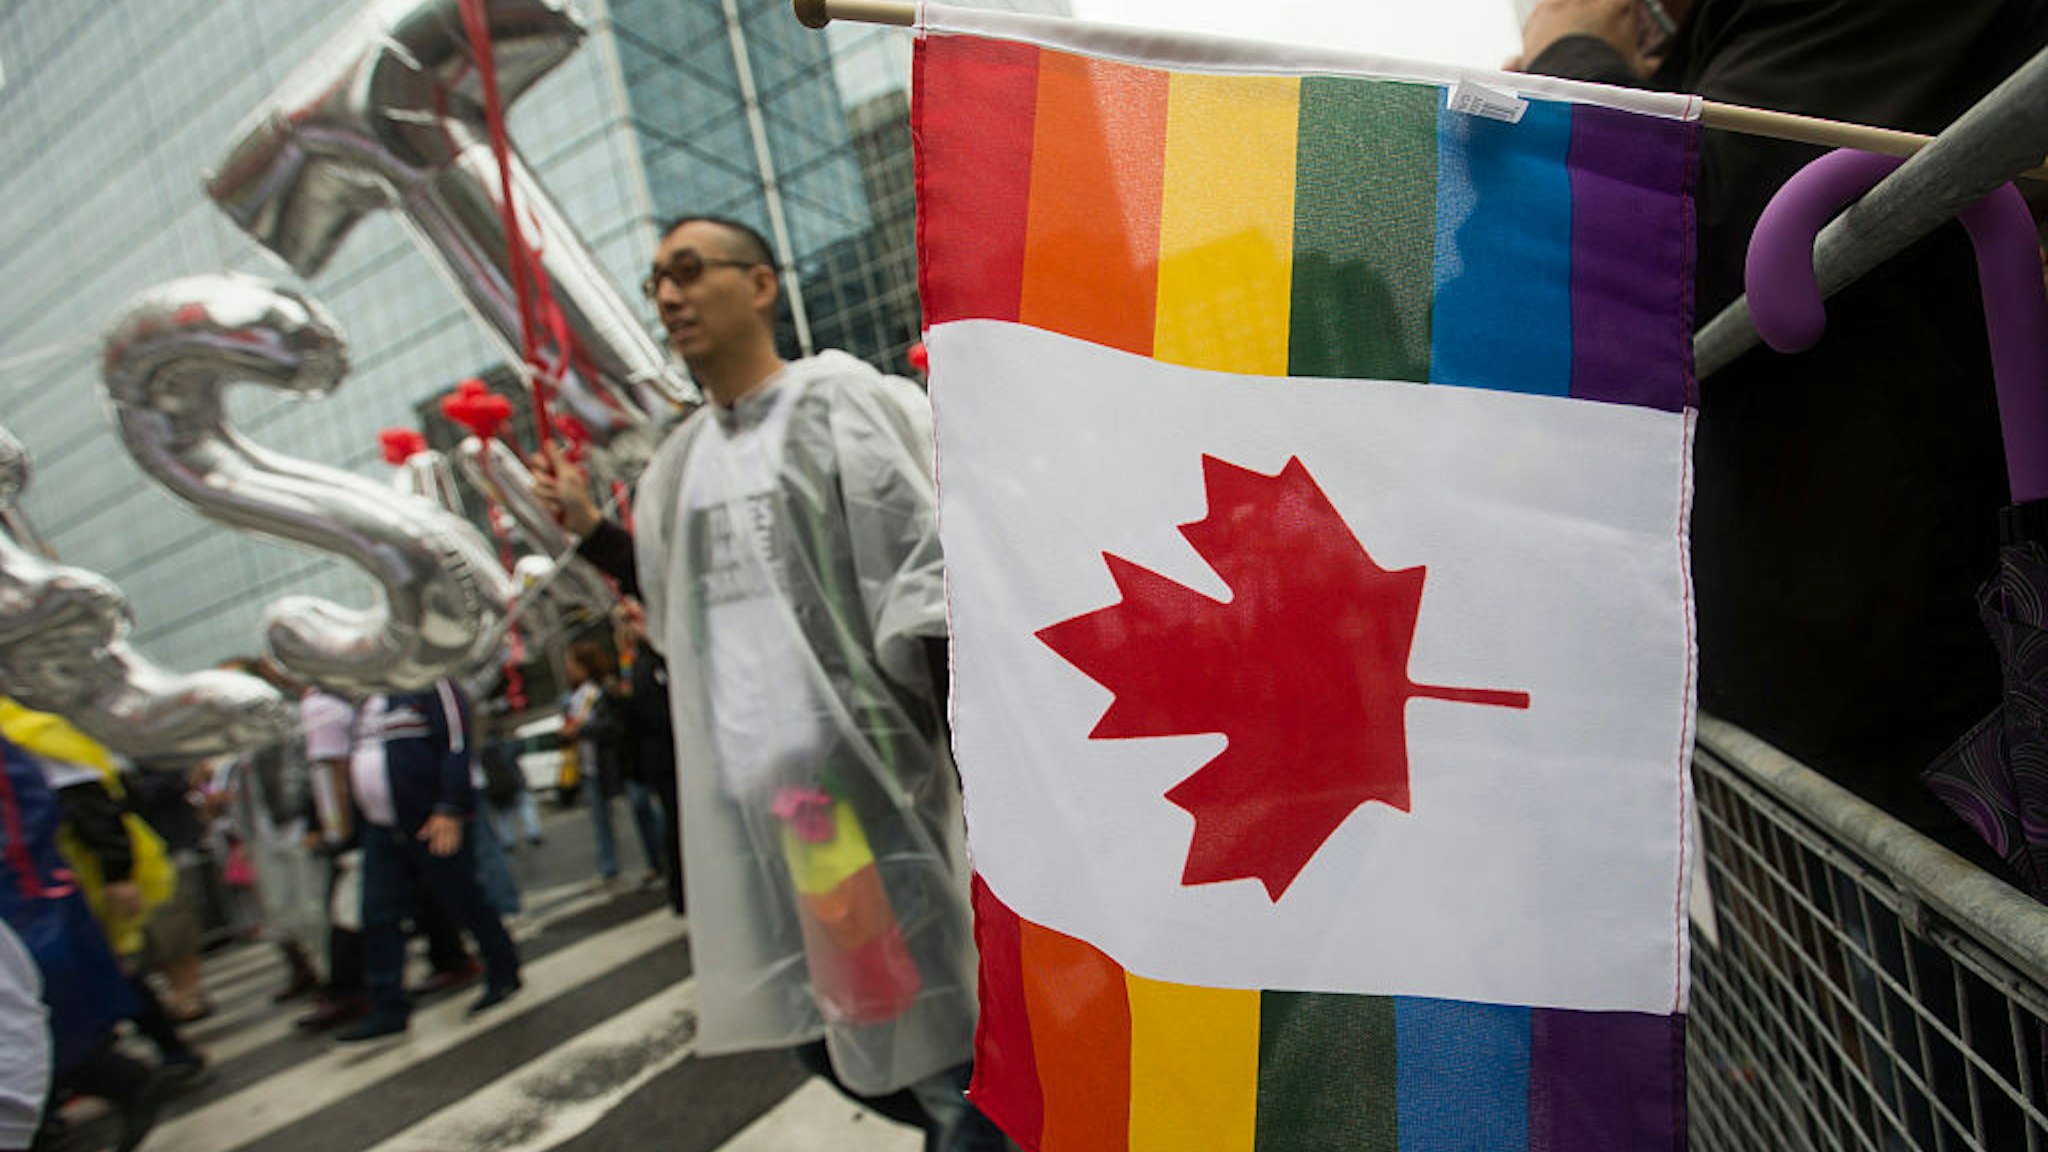 TORONTO, - JUNE 28, 2015 - A combination of a Canadian flag and a Pride flag hangs over the barrier on Bloor Street East. Toronto Pride 2015 took over the downtown core as the annual Pride Parade wound itself through the downtown. Photographed on JUNE 28, 2015. (Rick Madonik/Toronto Star via Getty Images)